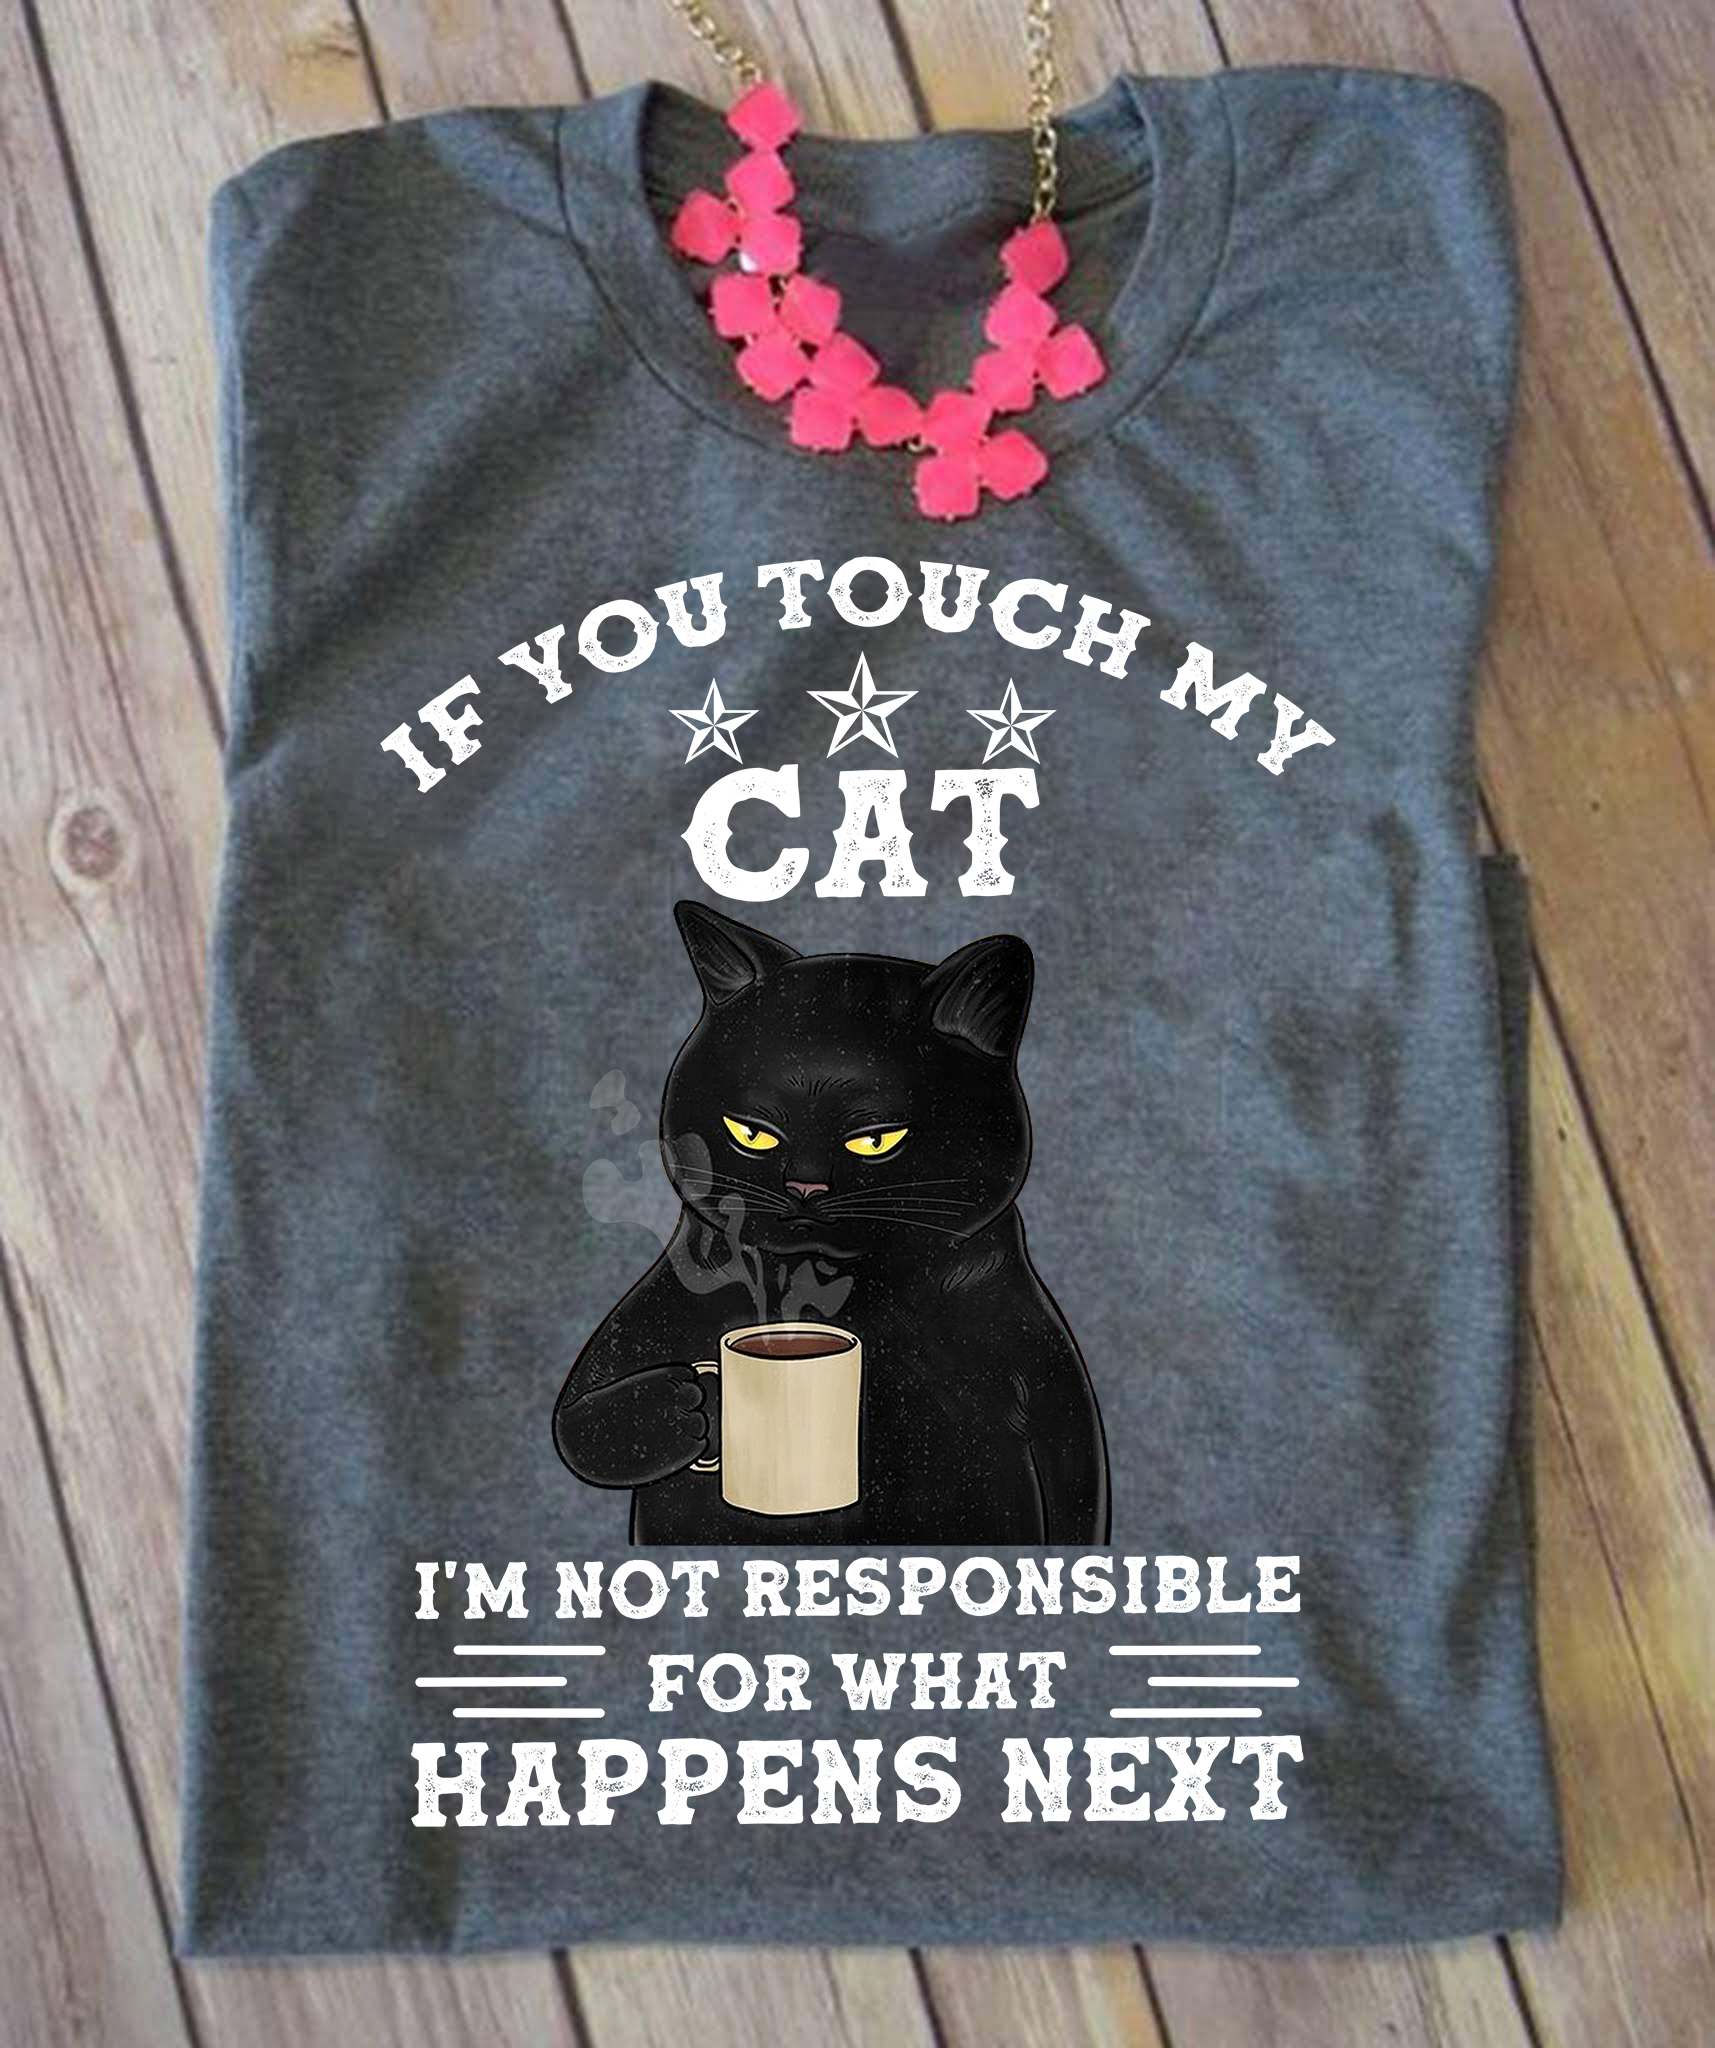 If you touch my cat I'm not responsible for what happens next - Cat lover